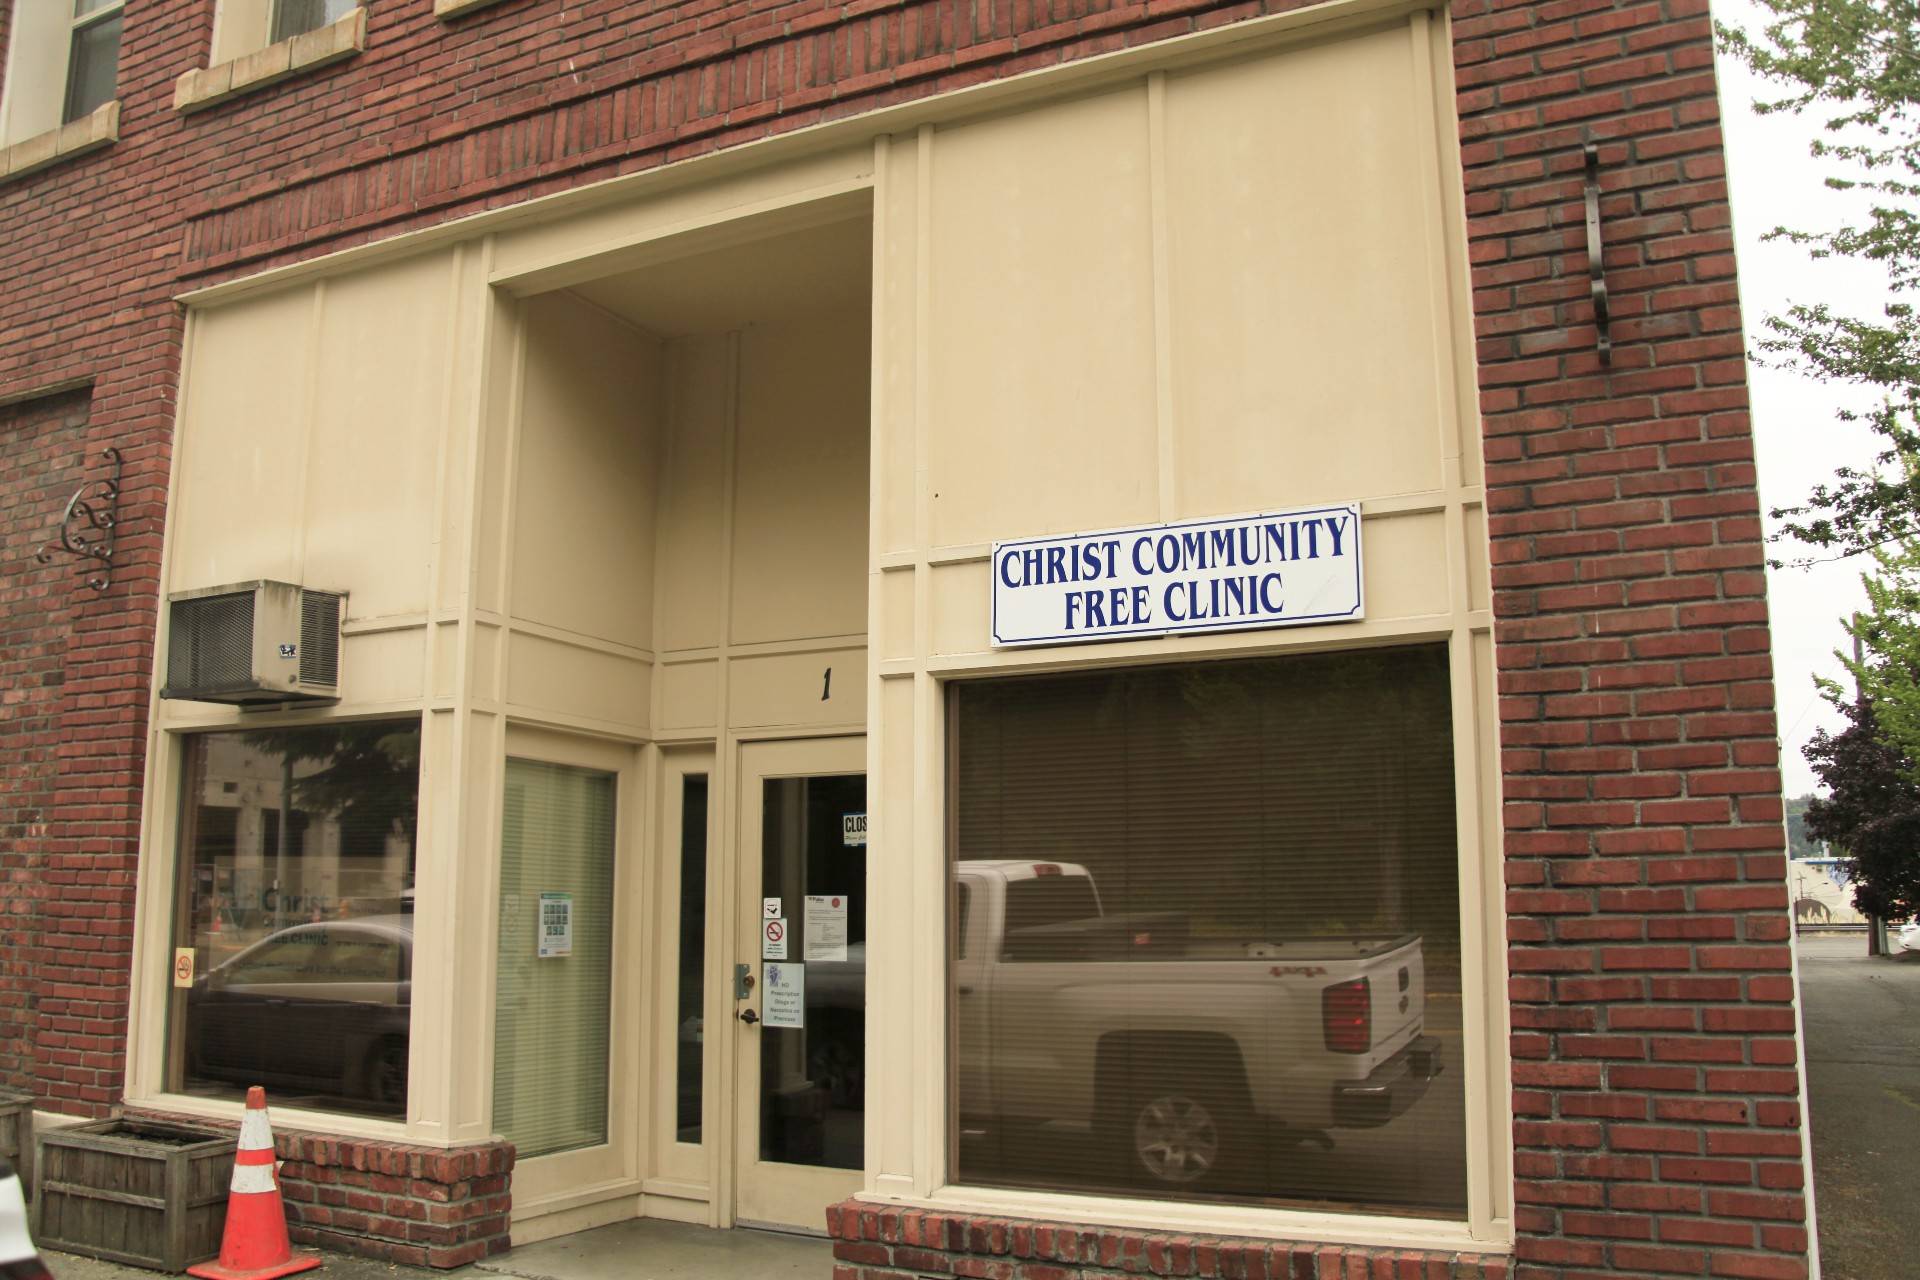 The Christ Community Free Clinic is set to re-open from 5:30-8 p.m. July 20. The clinic is located at 1 A street NW in Auburn. Photo By Henry Stewart-Wood/Auburn Reporter